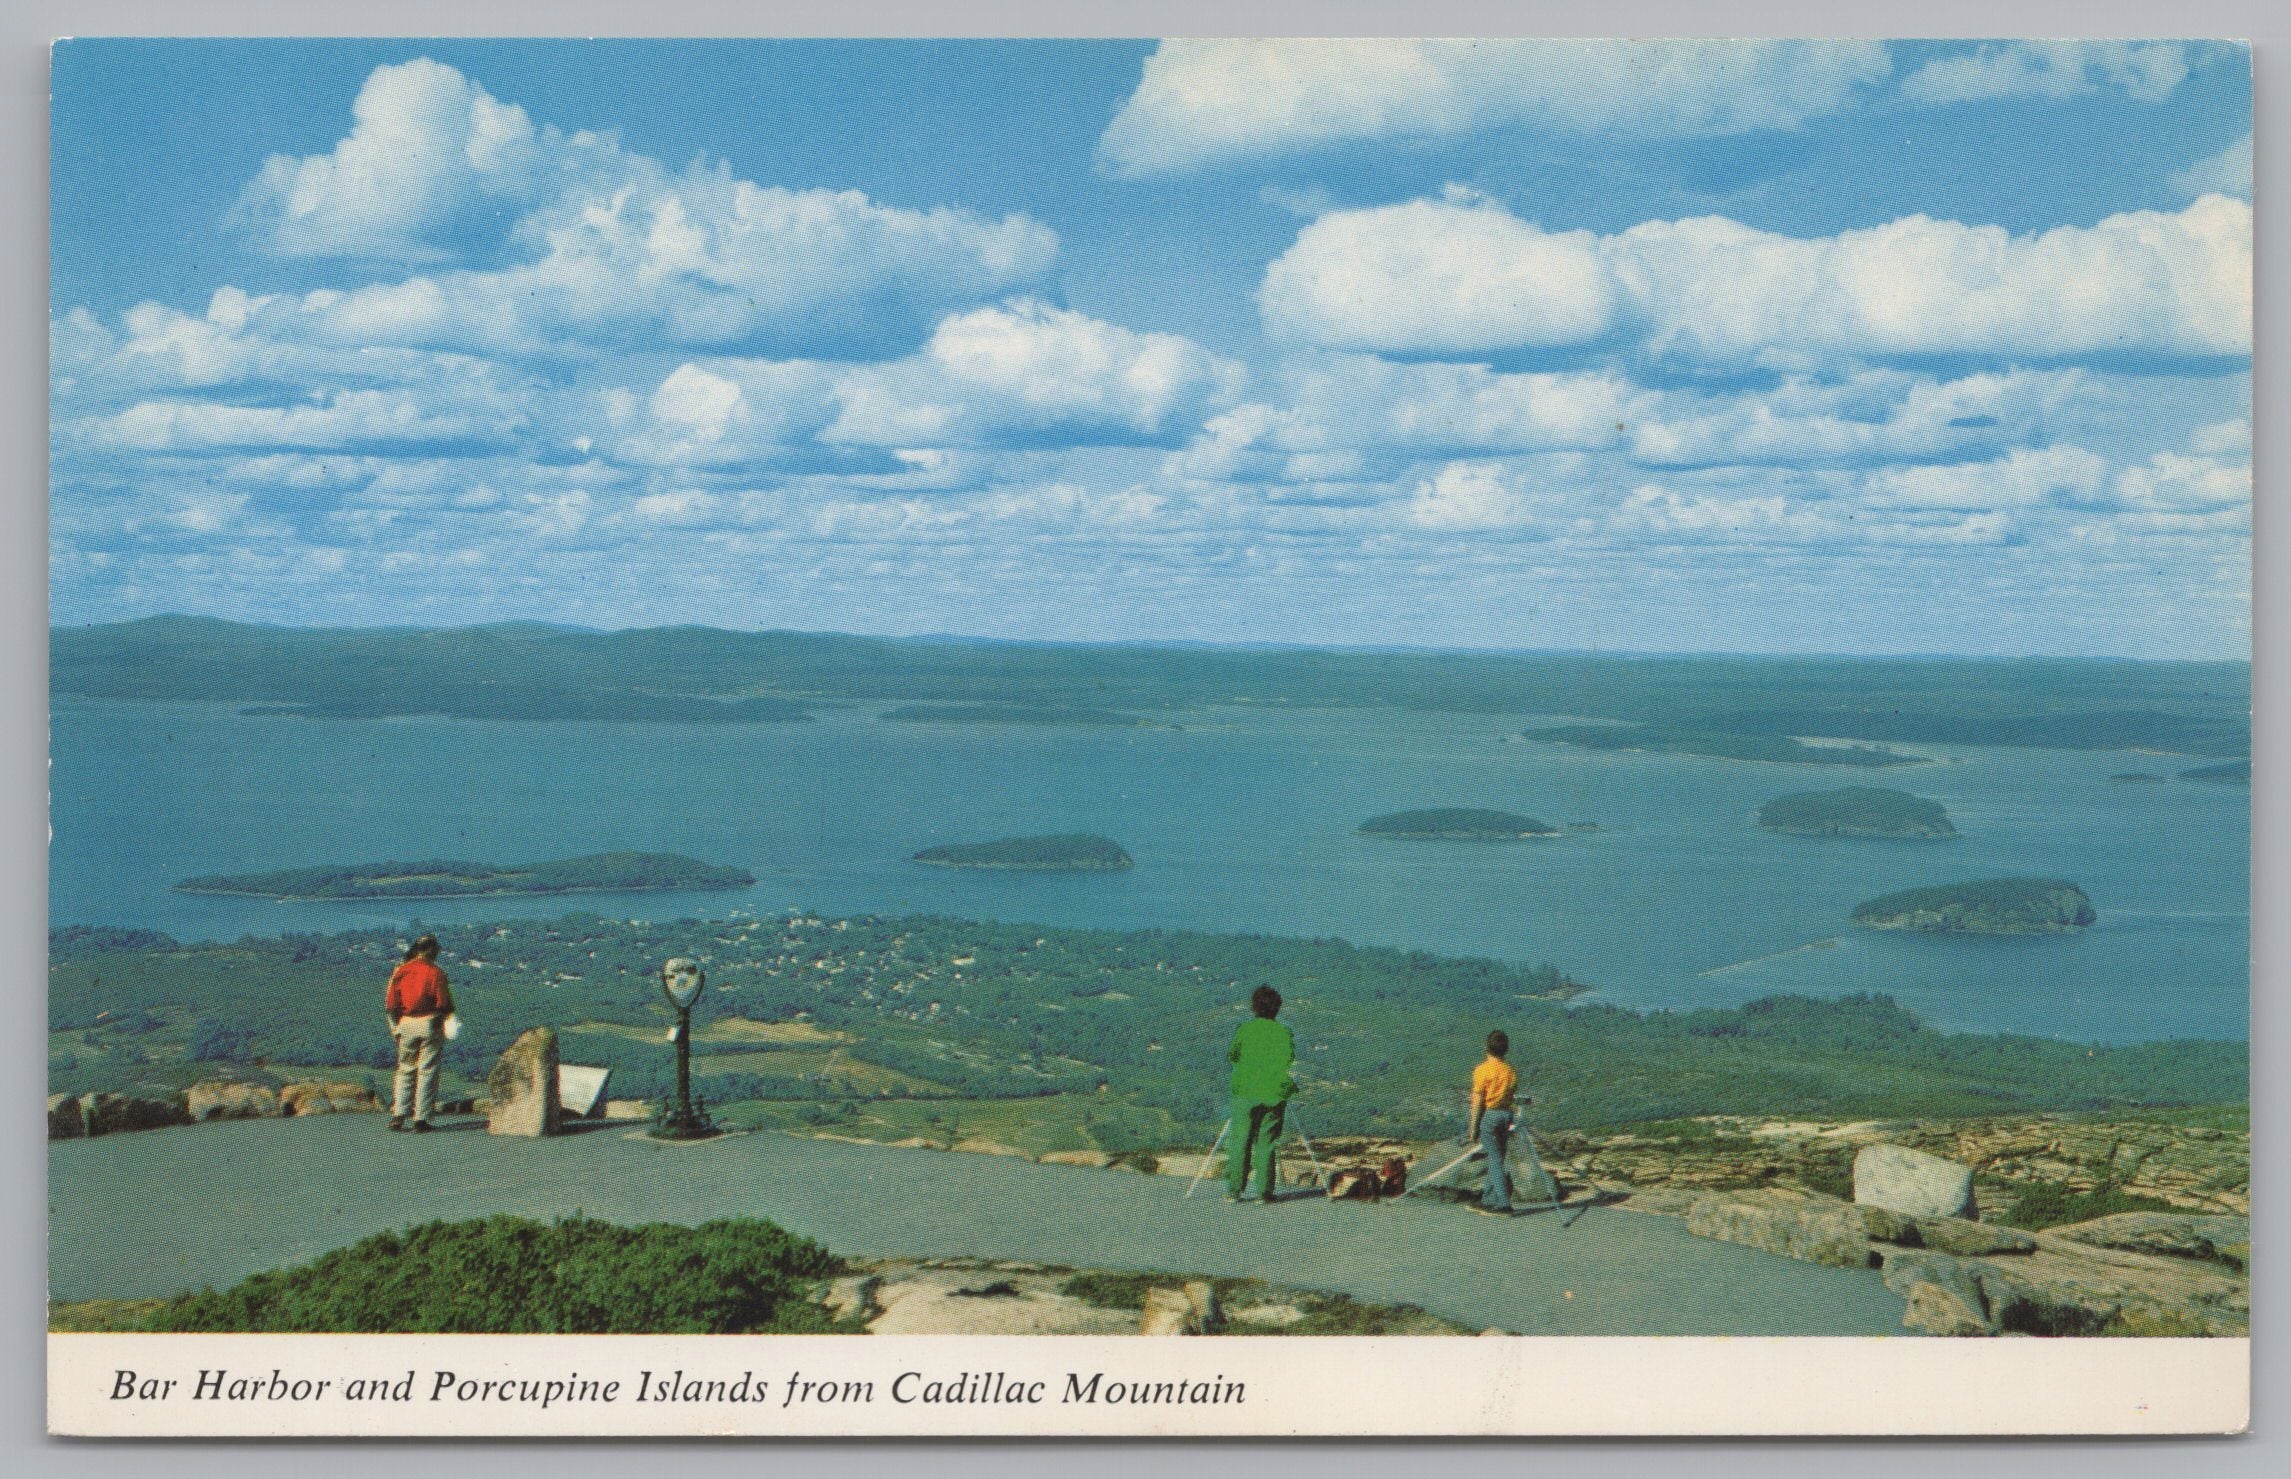 Bar Harbor And Porcupine Islands From Cadillac Mountain, Vintage Post Card.